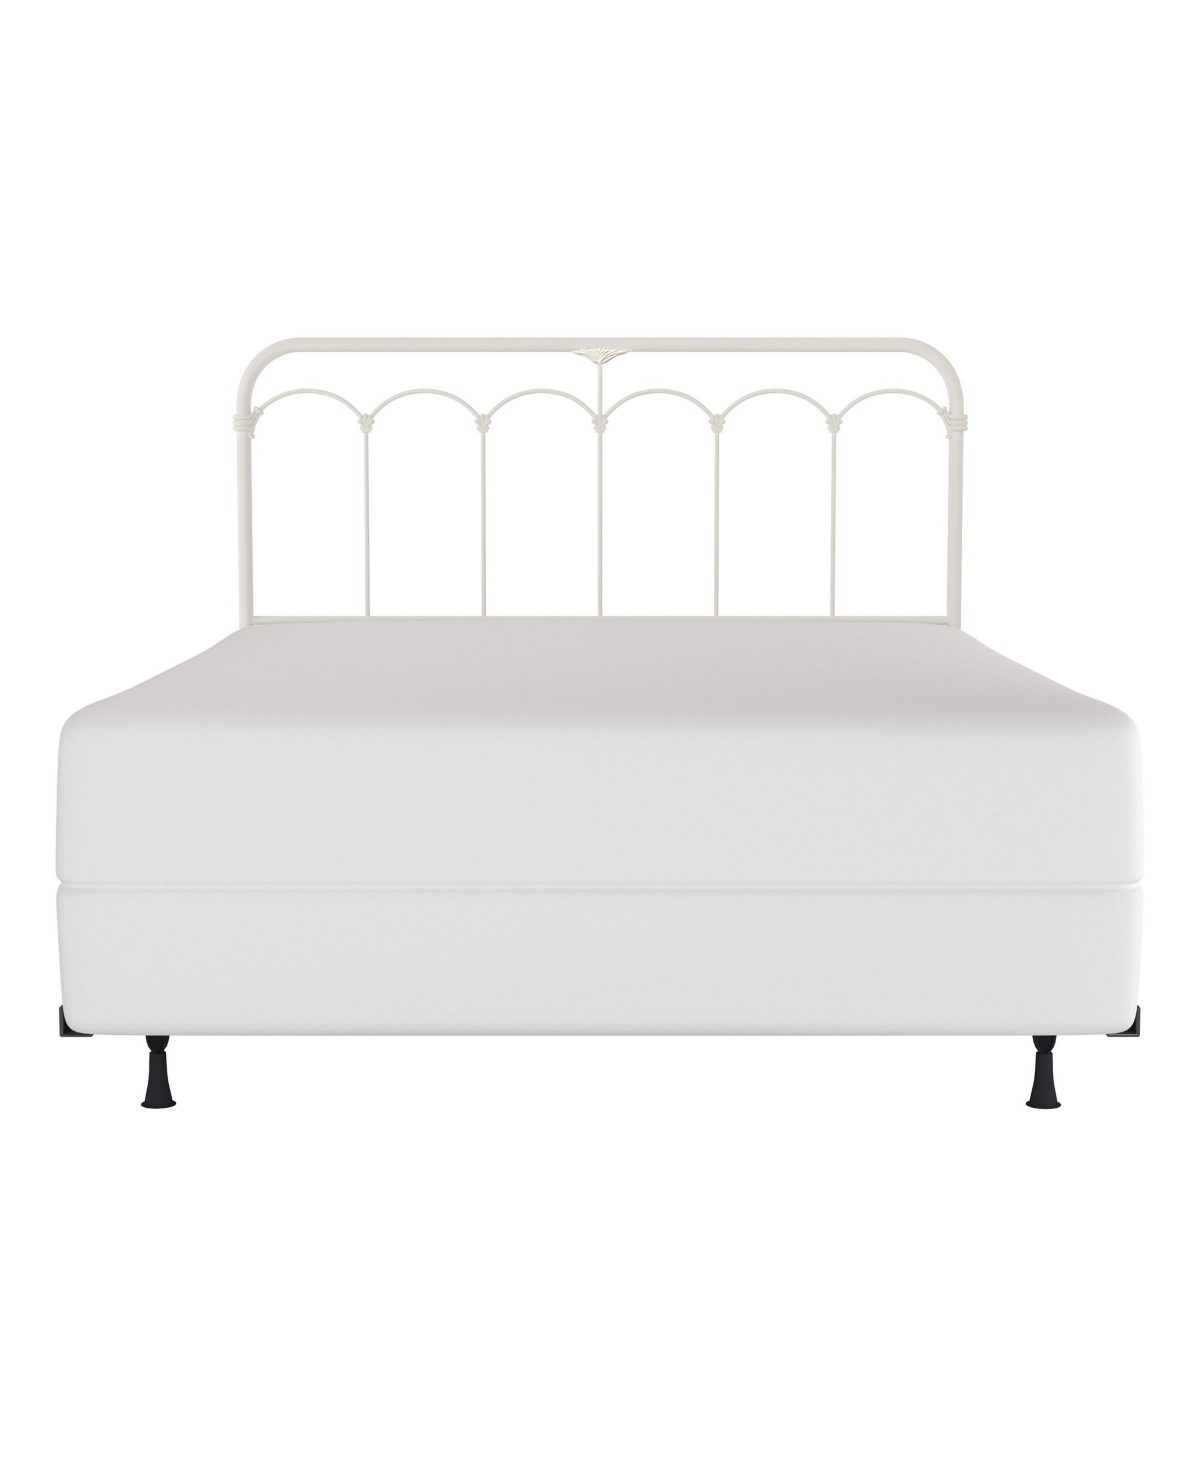 Hillsdale 50" Metal Jocelyn Furniture Queen Headboard And Frame In Textured White